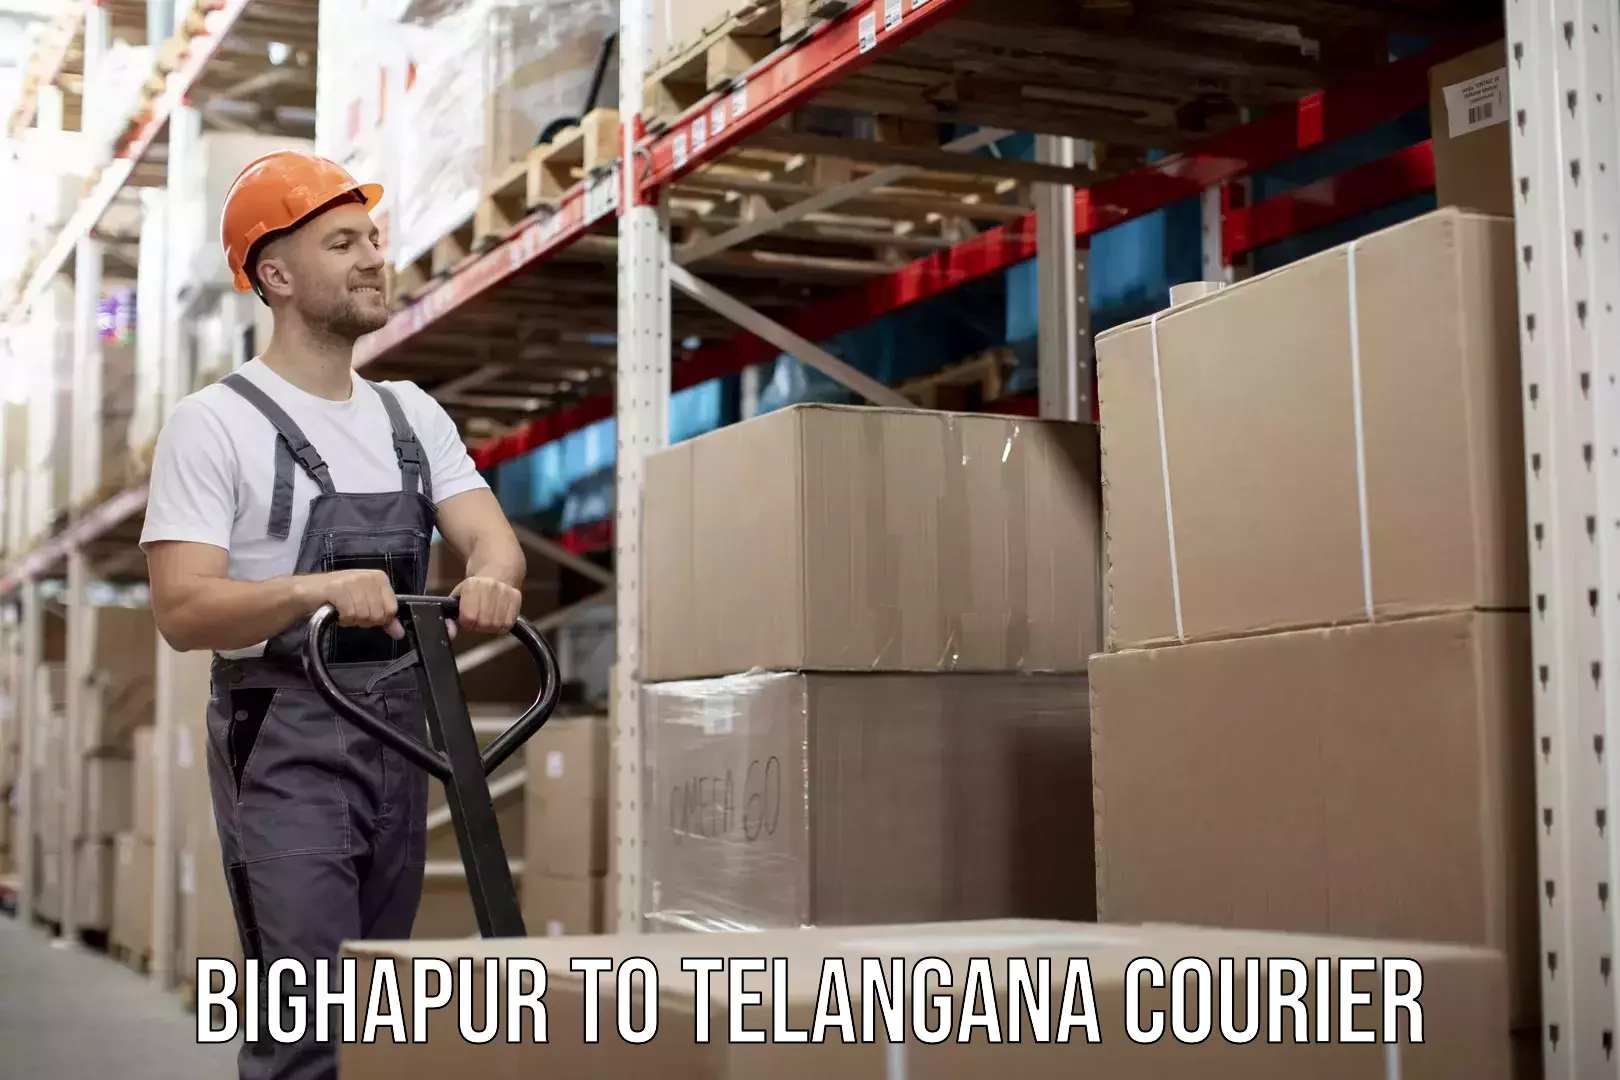 Round-the-clock parcel delivery Bighapur to Telangana